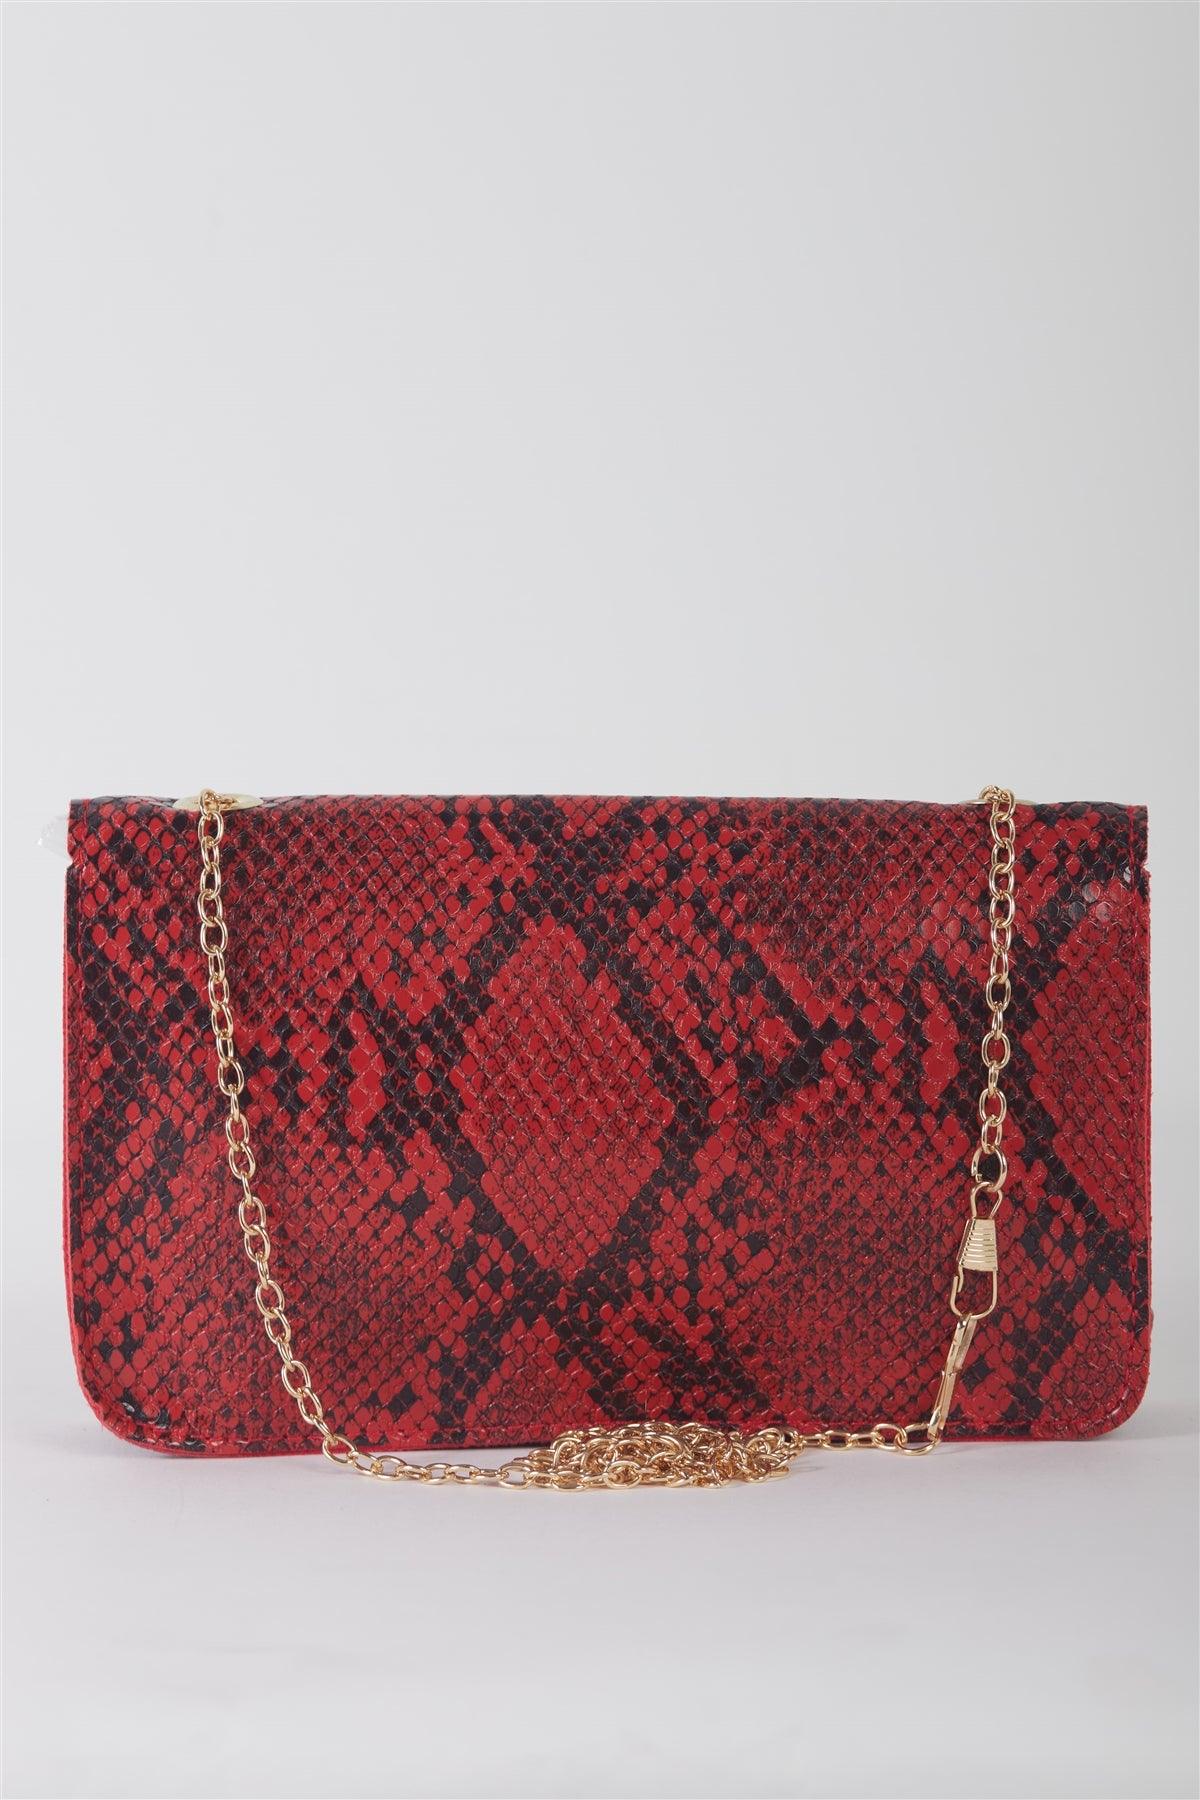 Red Faux Snake Leather Metal Rings Gold Chain Crossbody Bag /3 Bags